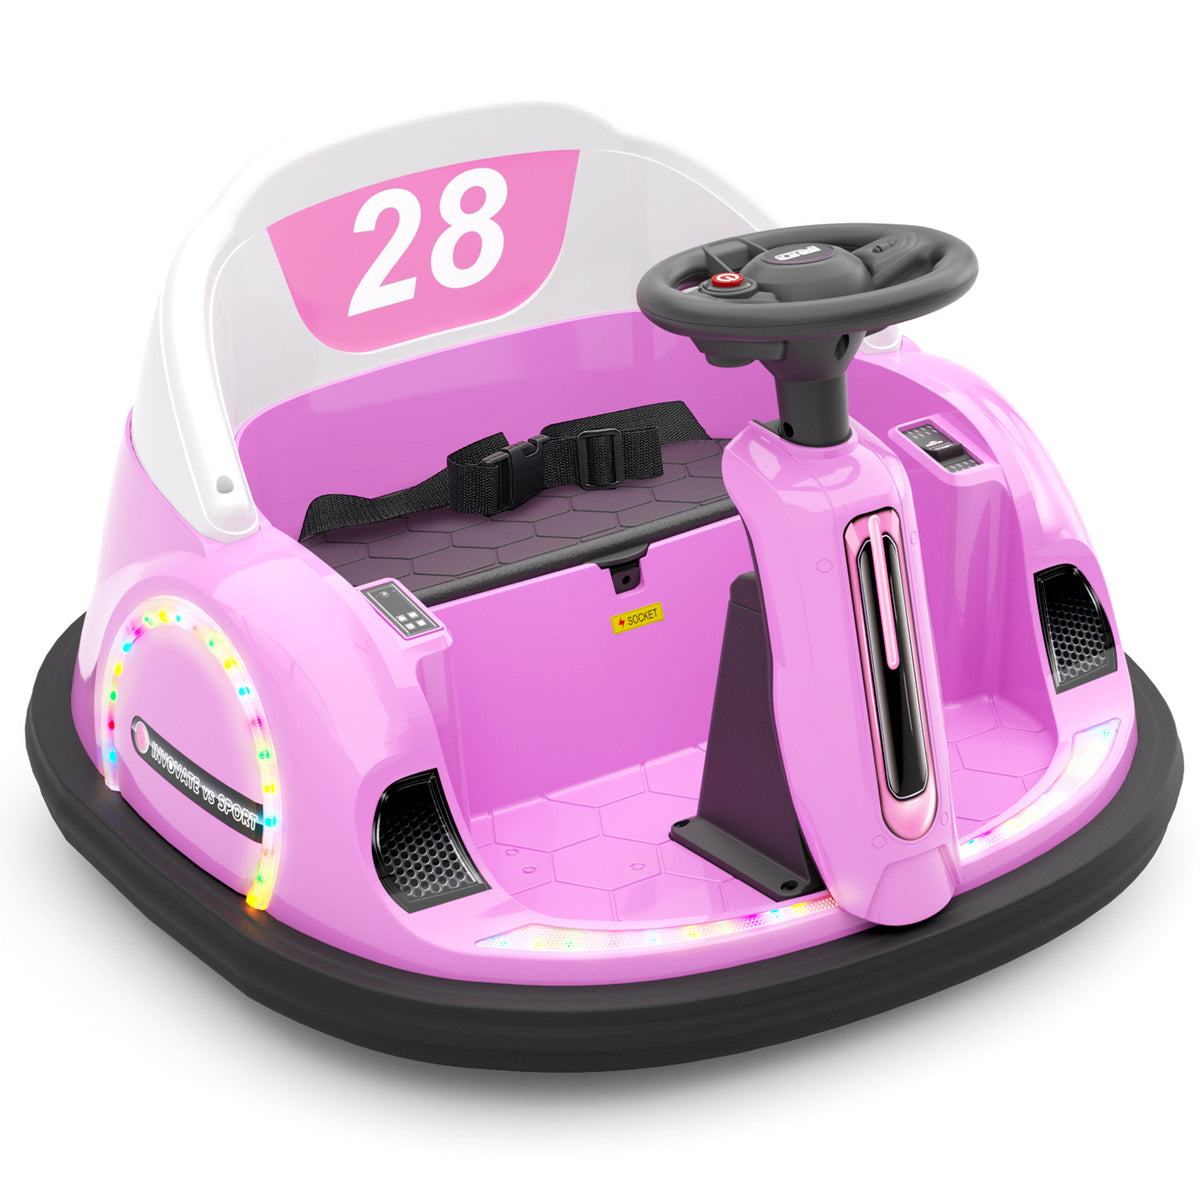 6V Electric Ride on Bumper Car Toys for Kids Toddlers 2-4 Years Old, 360° Spinning Bumping Toy Gifts Cars, Music Play, Lights, 0-2 mph, Pink